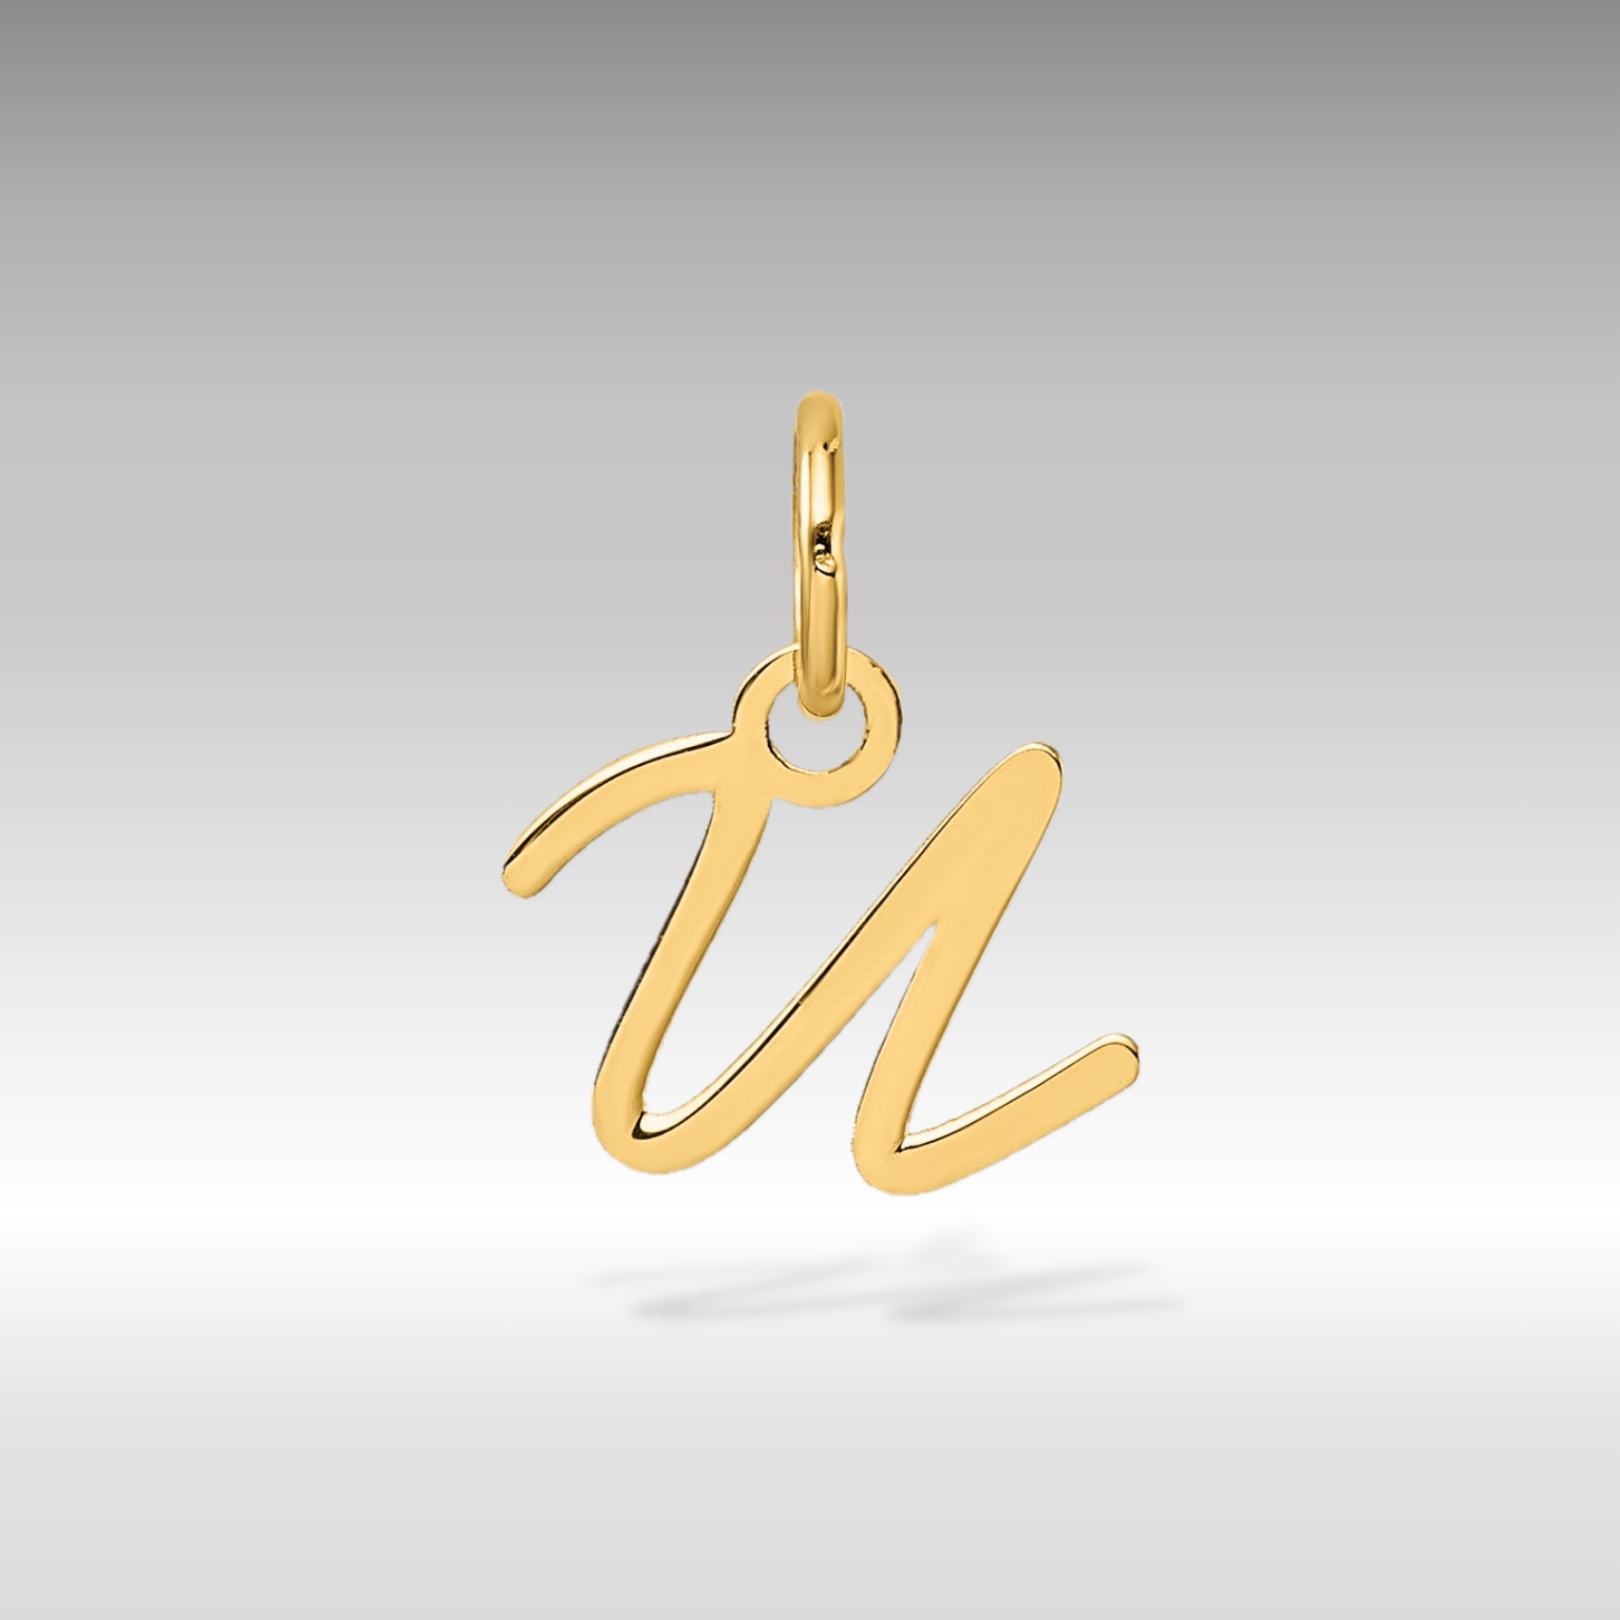 14K Gold Small Script Letter "U" Initial Pendant - Charlie & Co. Jewelry